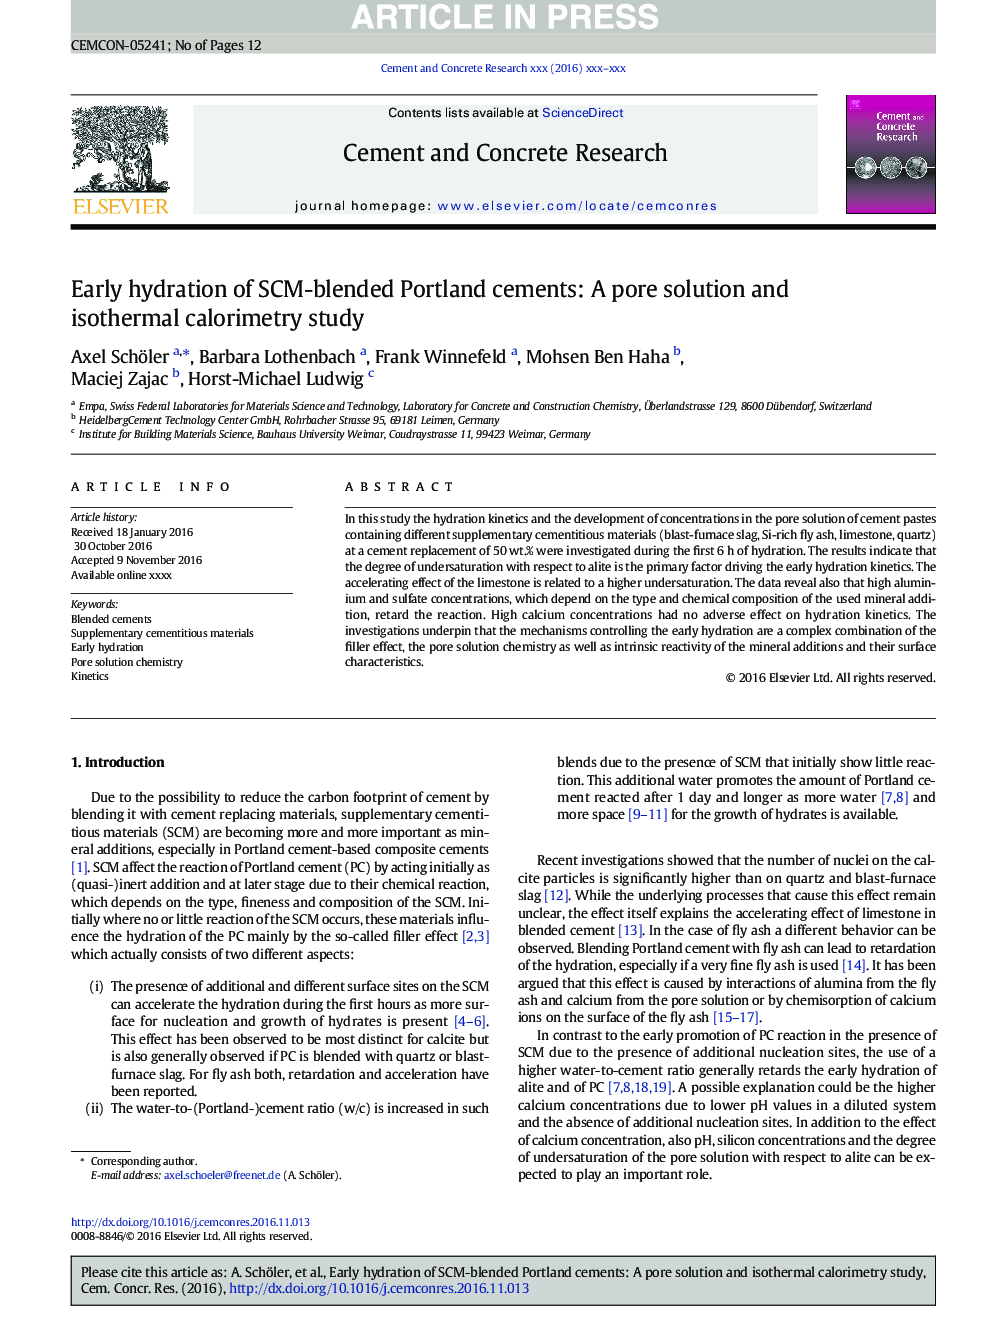 Early hydration of SCM-blended Portland cements: A pore solution and isothermal calorimetry study